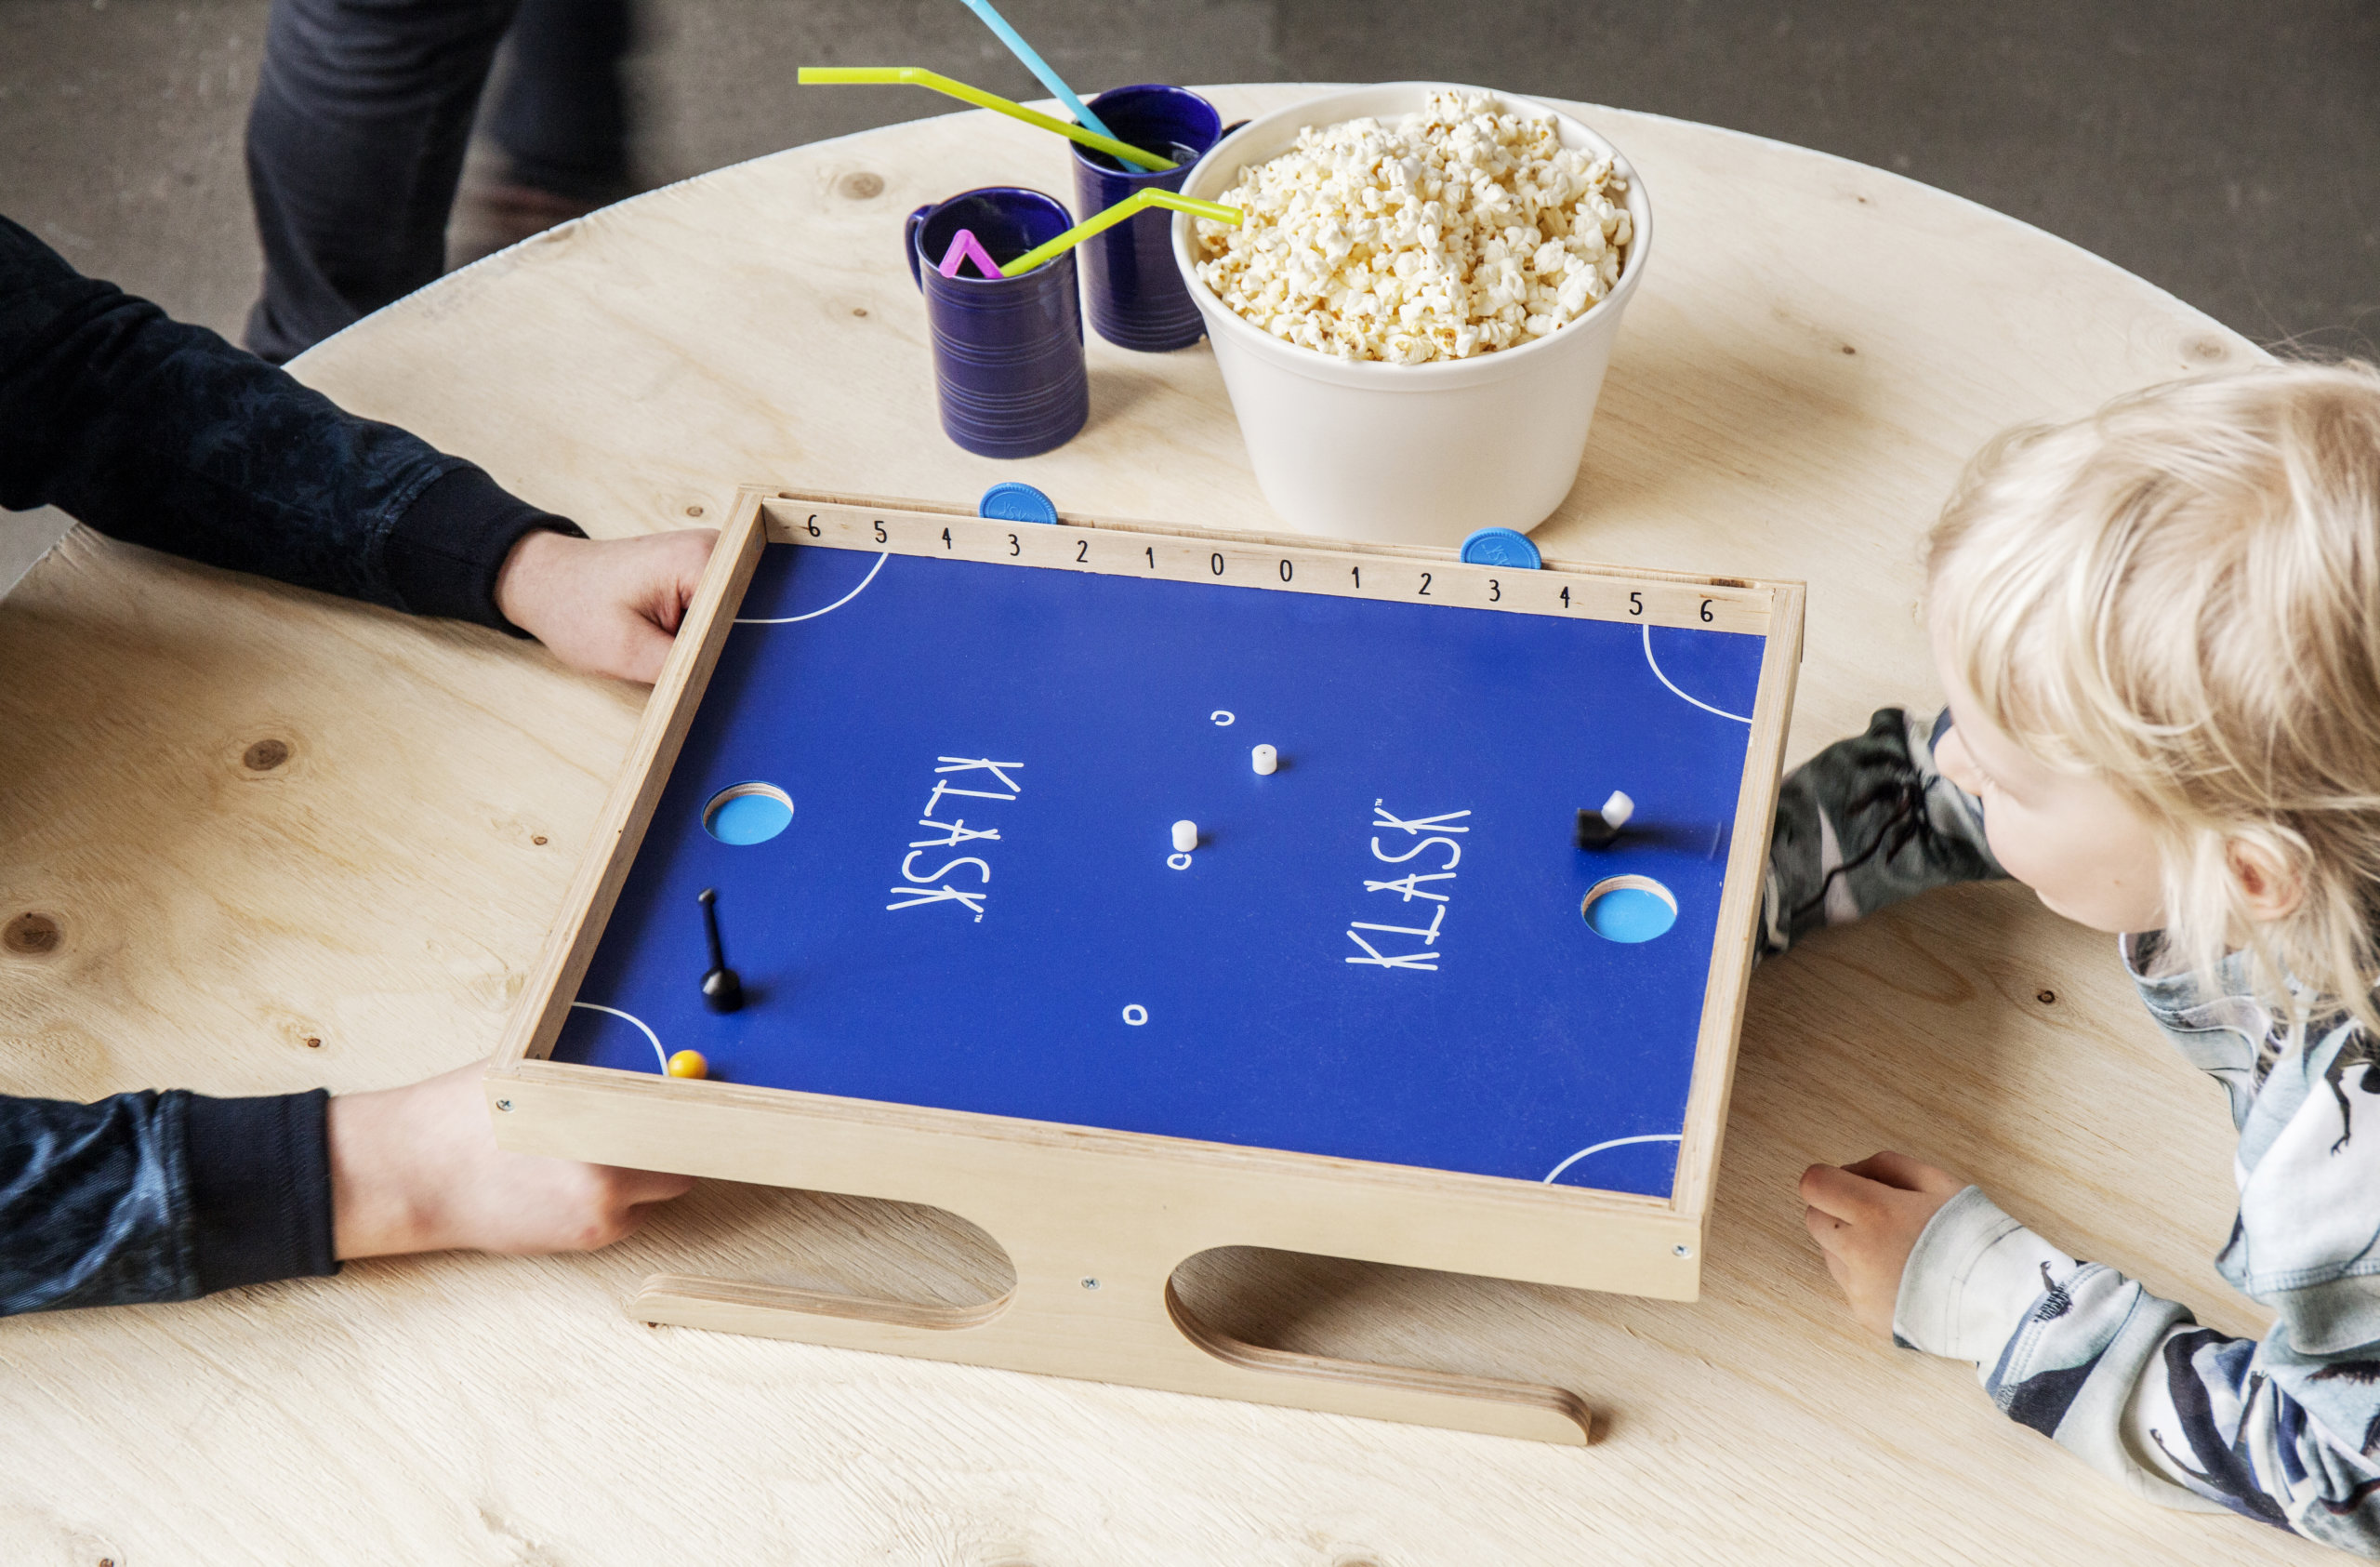 Klask is a fun gift for the whole family